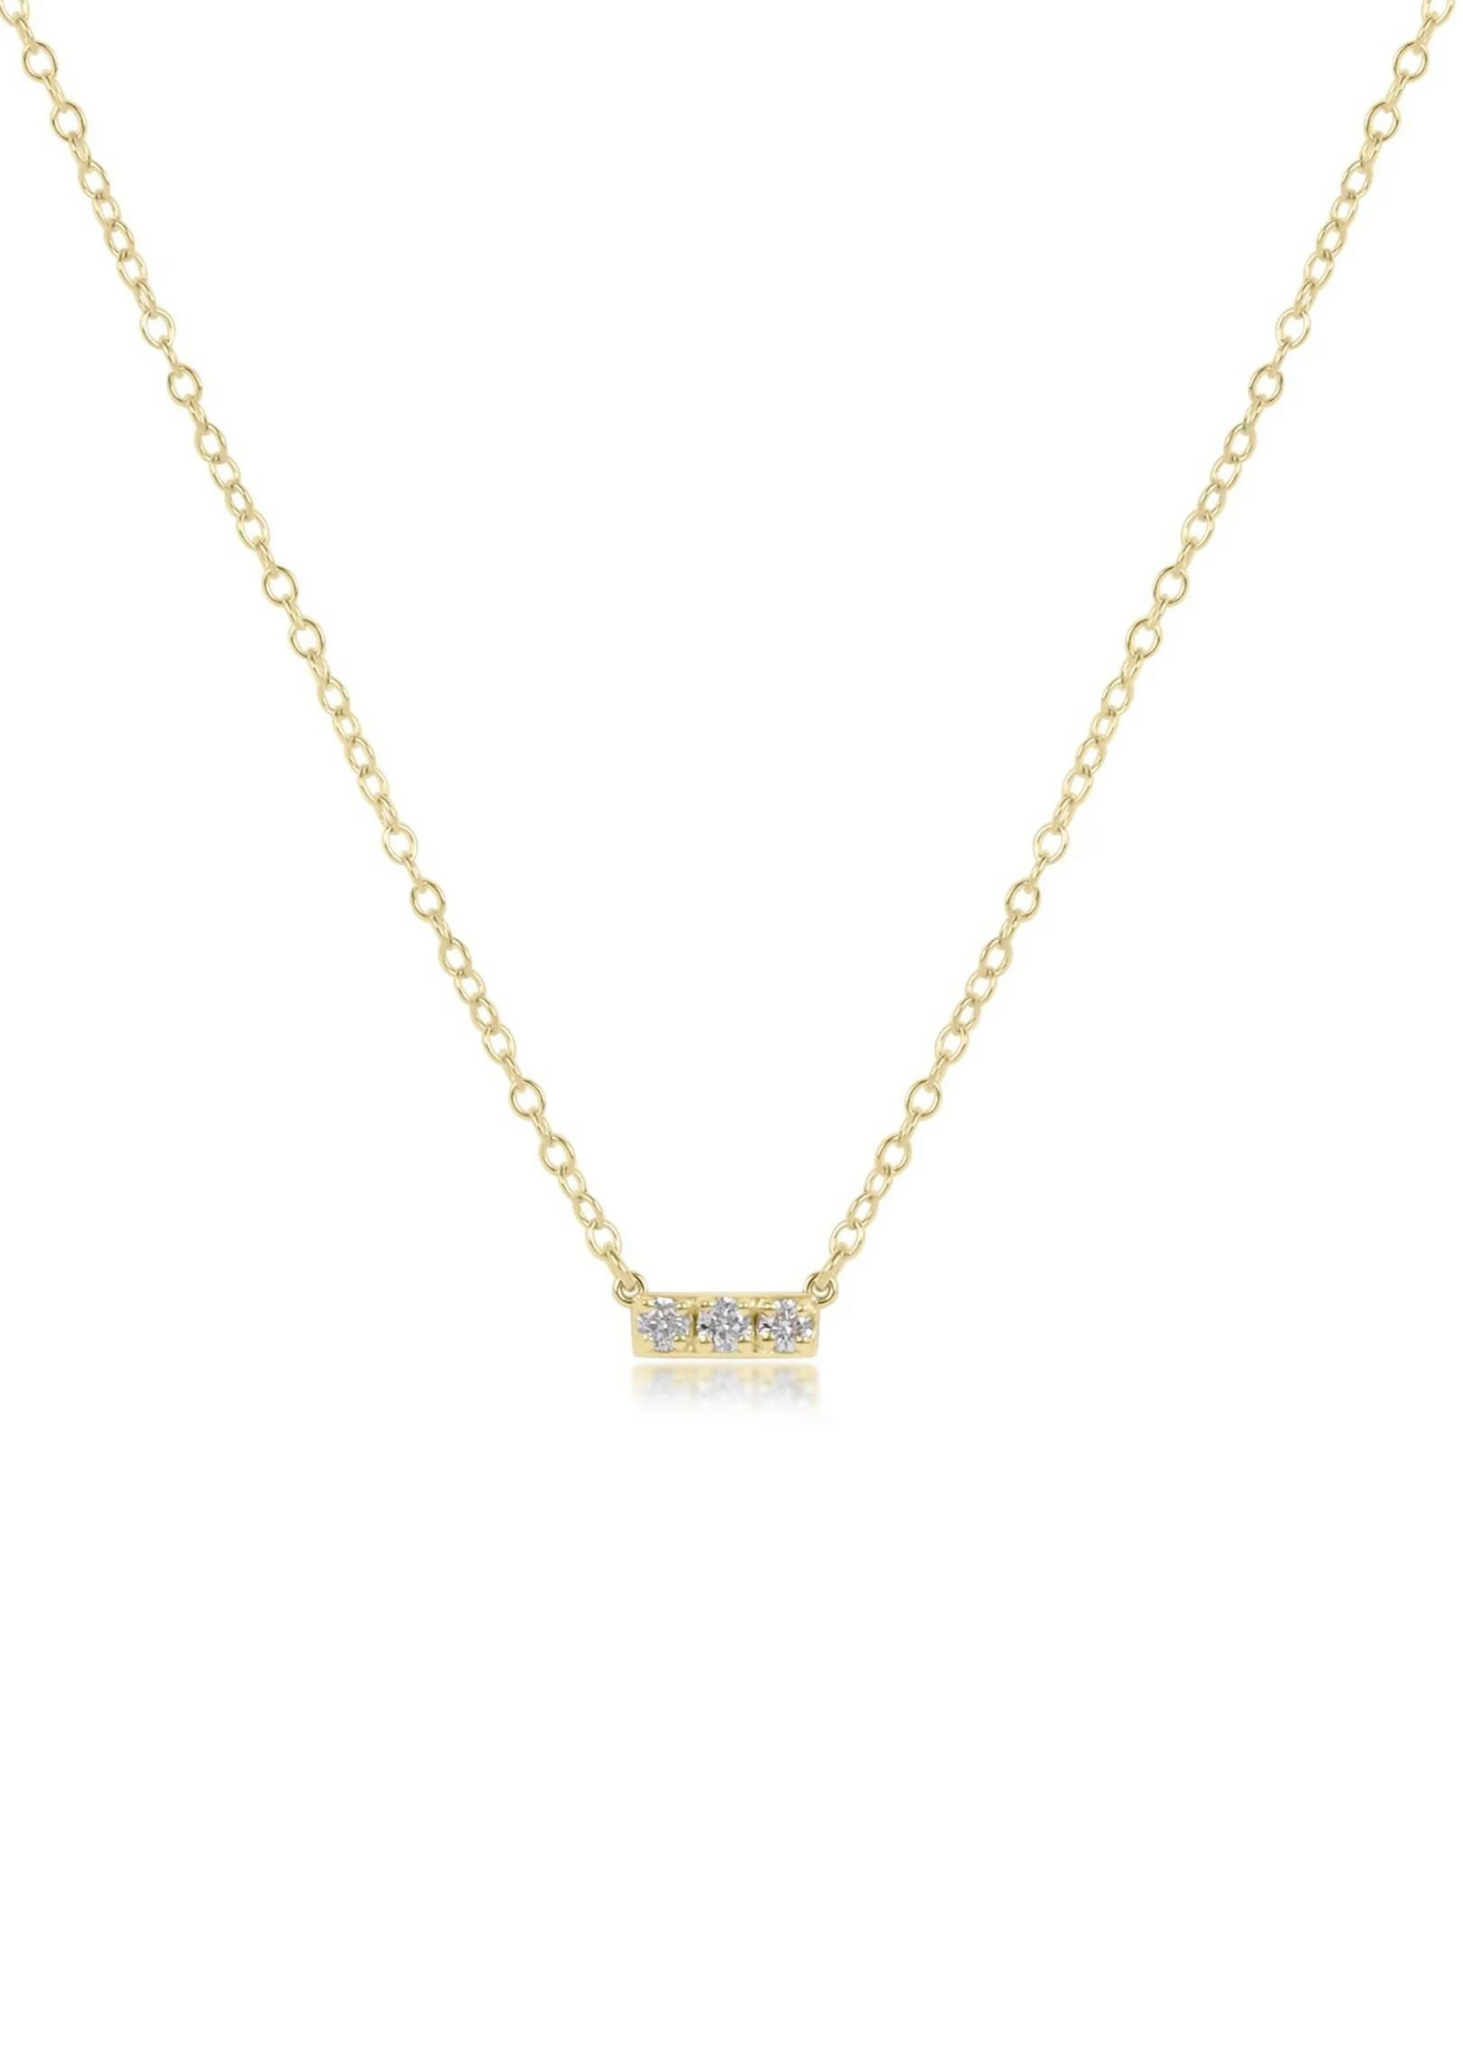 14kt Gold and Diamond Significance Bar Necklace - Three